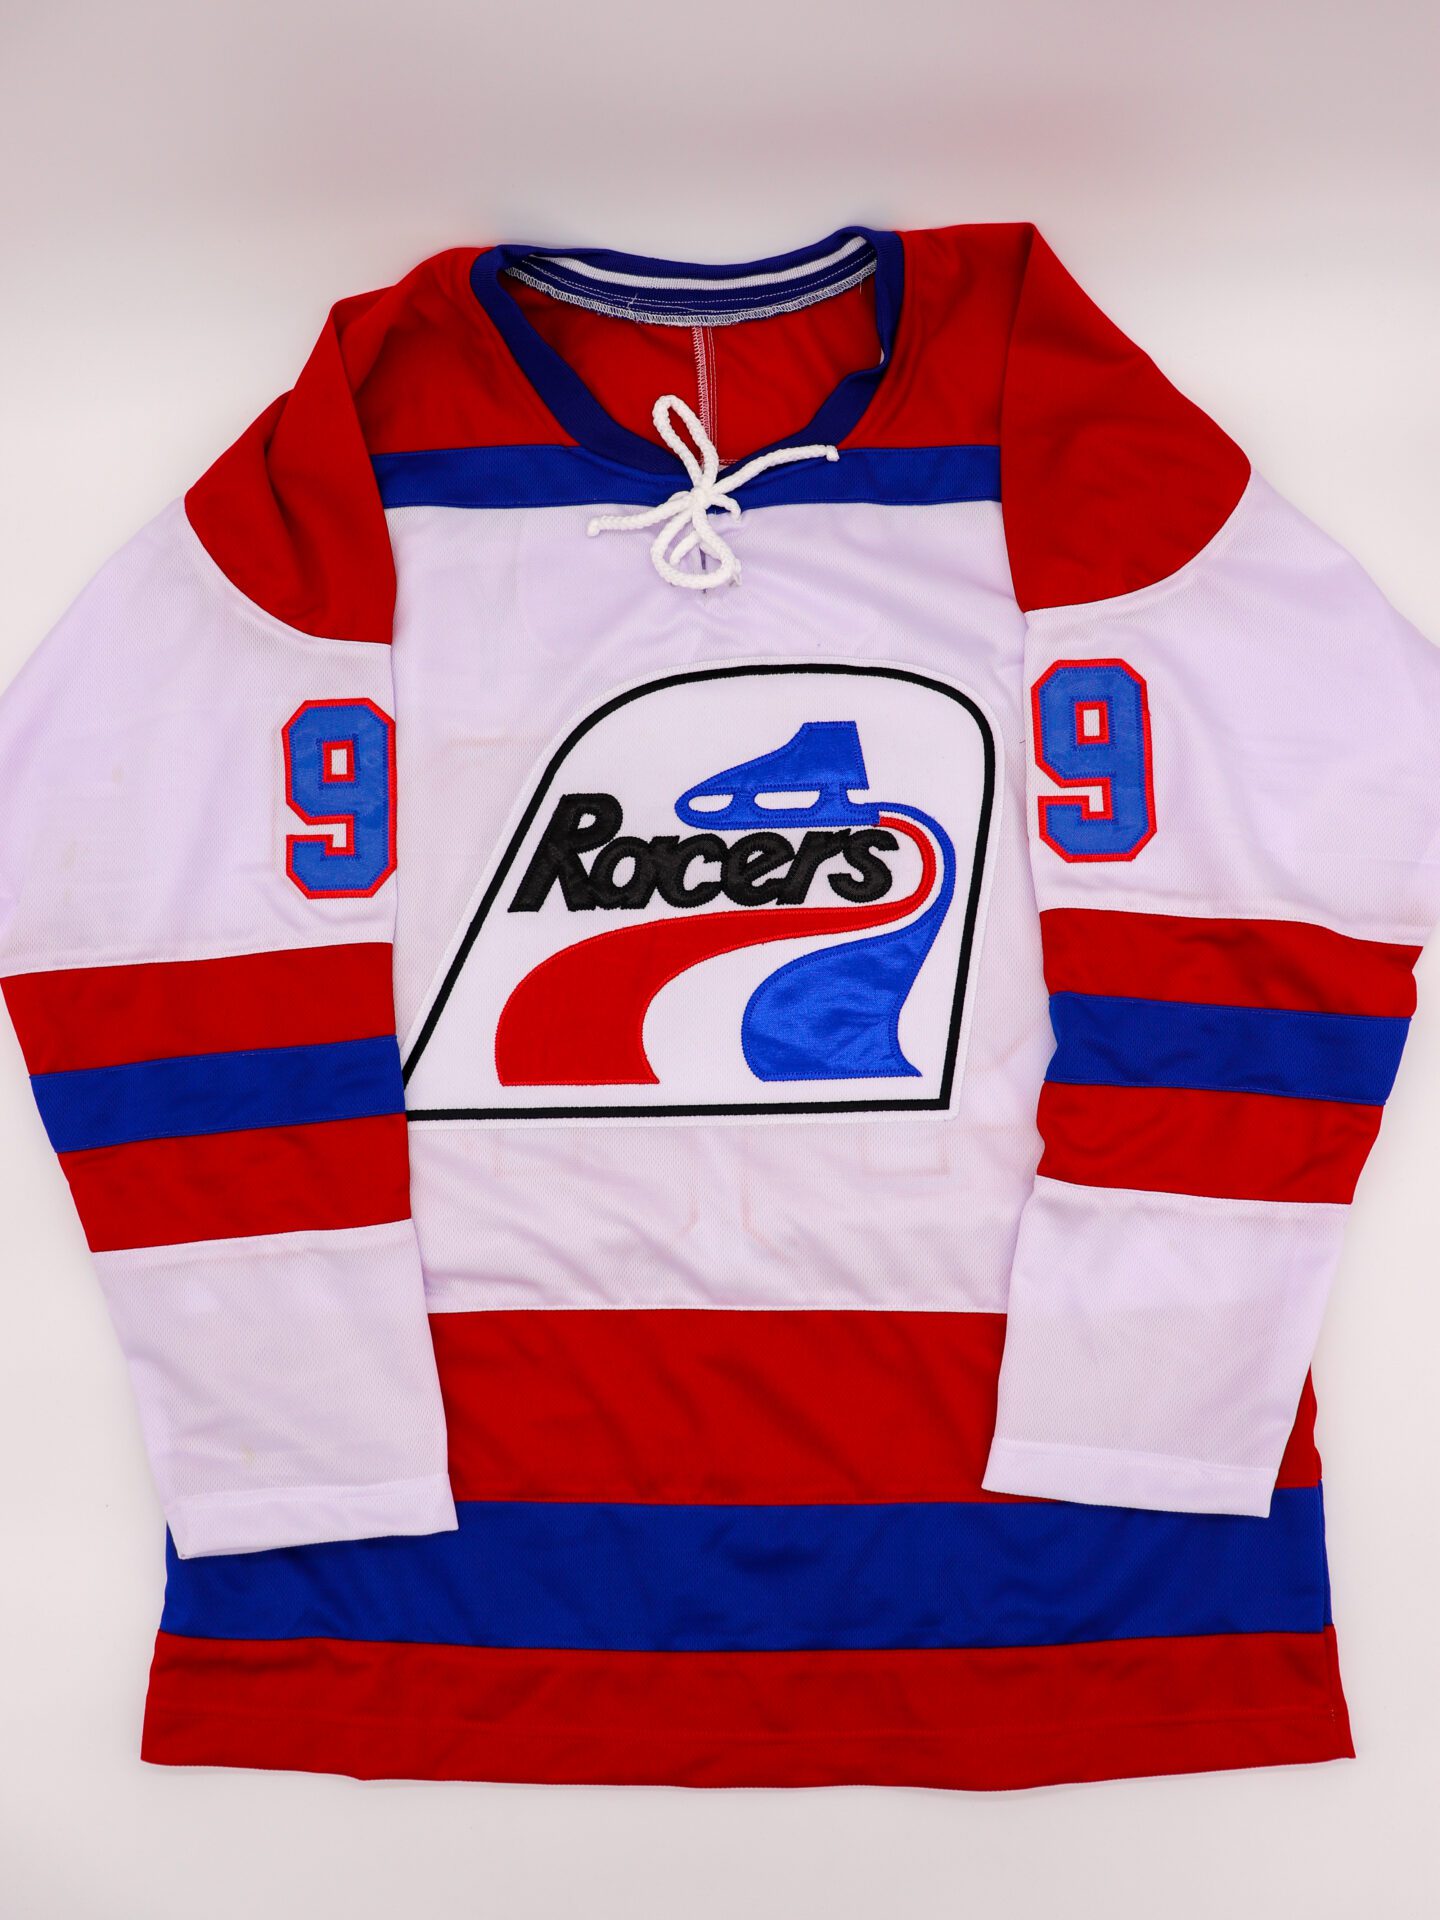 to Die for Collectibles 1978 #99 Wayne Gretzky Indianapolis Racers Home White Wha Jersey, Size XXL, New Without Tags